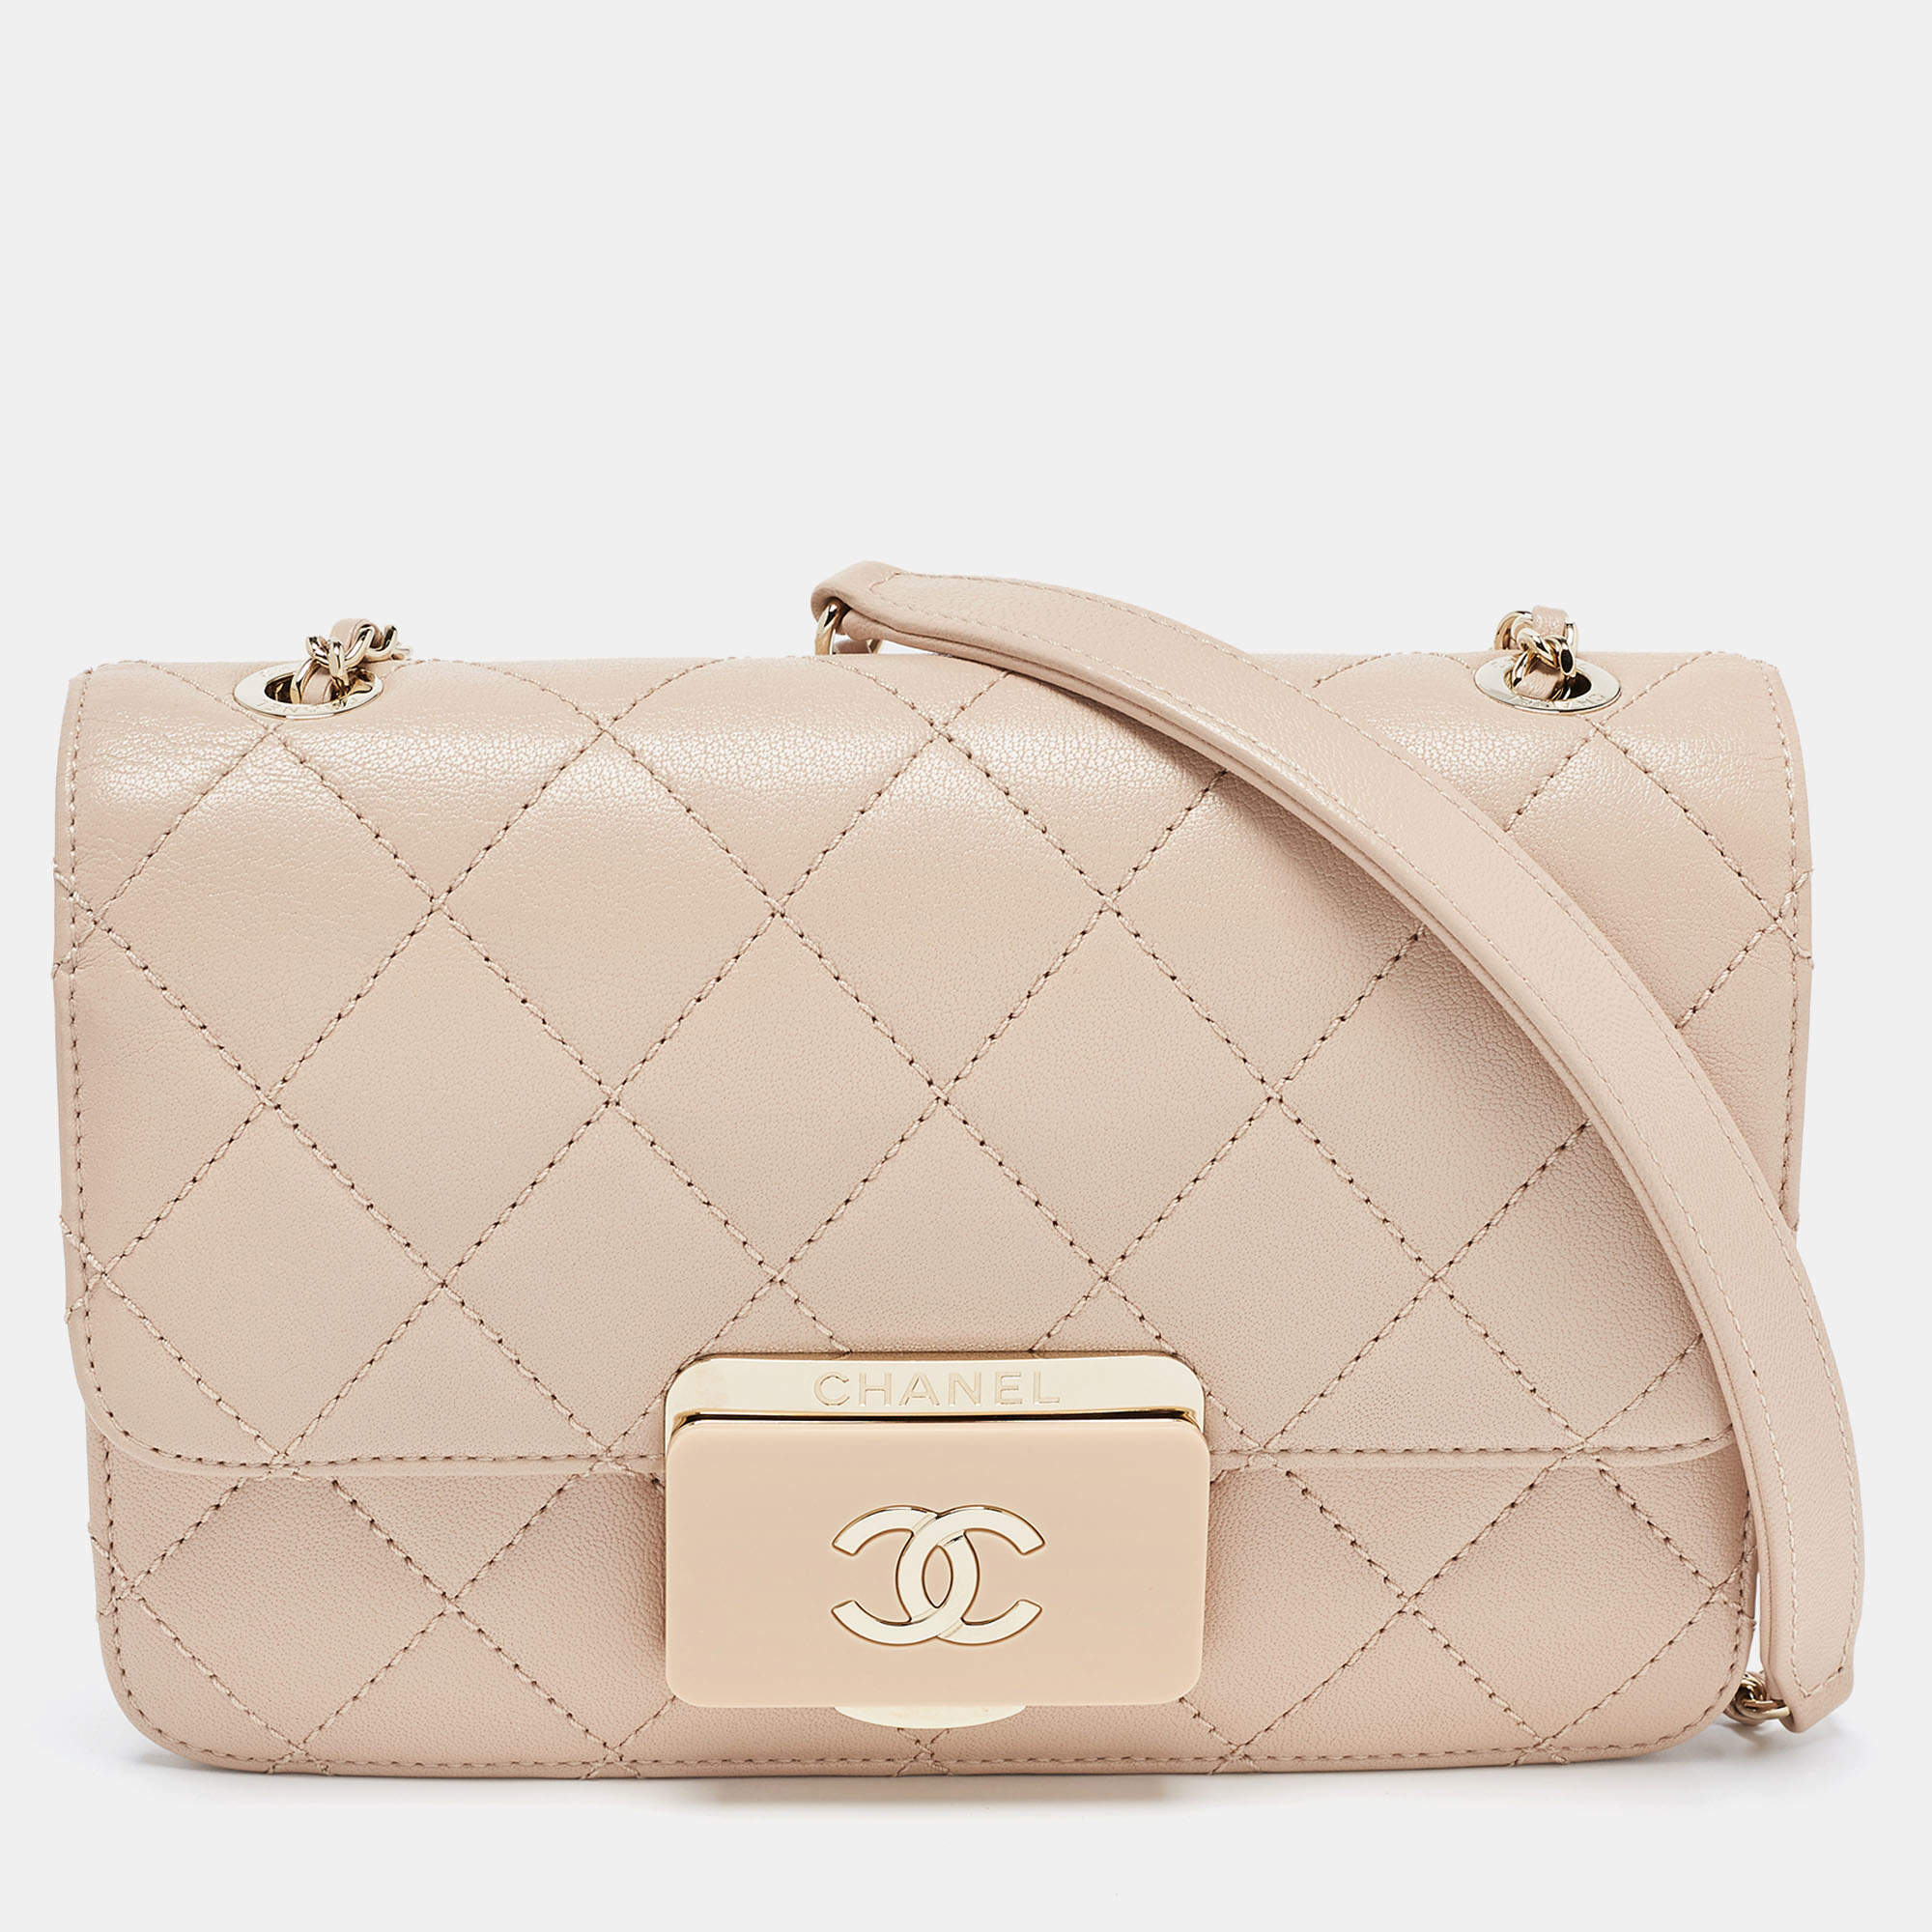 Chanel Beige Quilted Leather Mini Beauty Lock Flap Bag